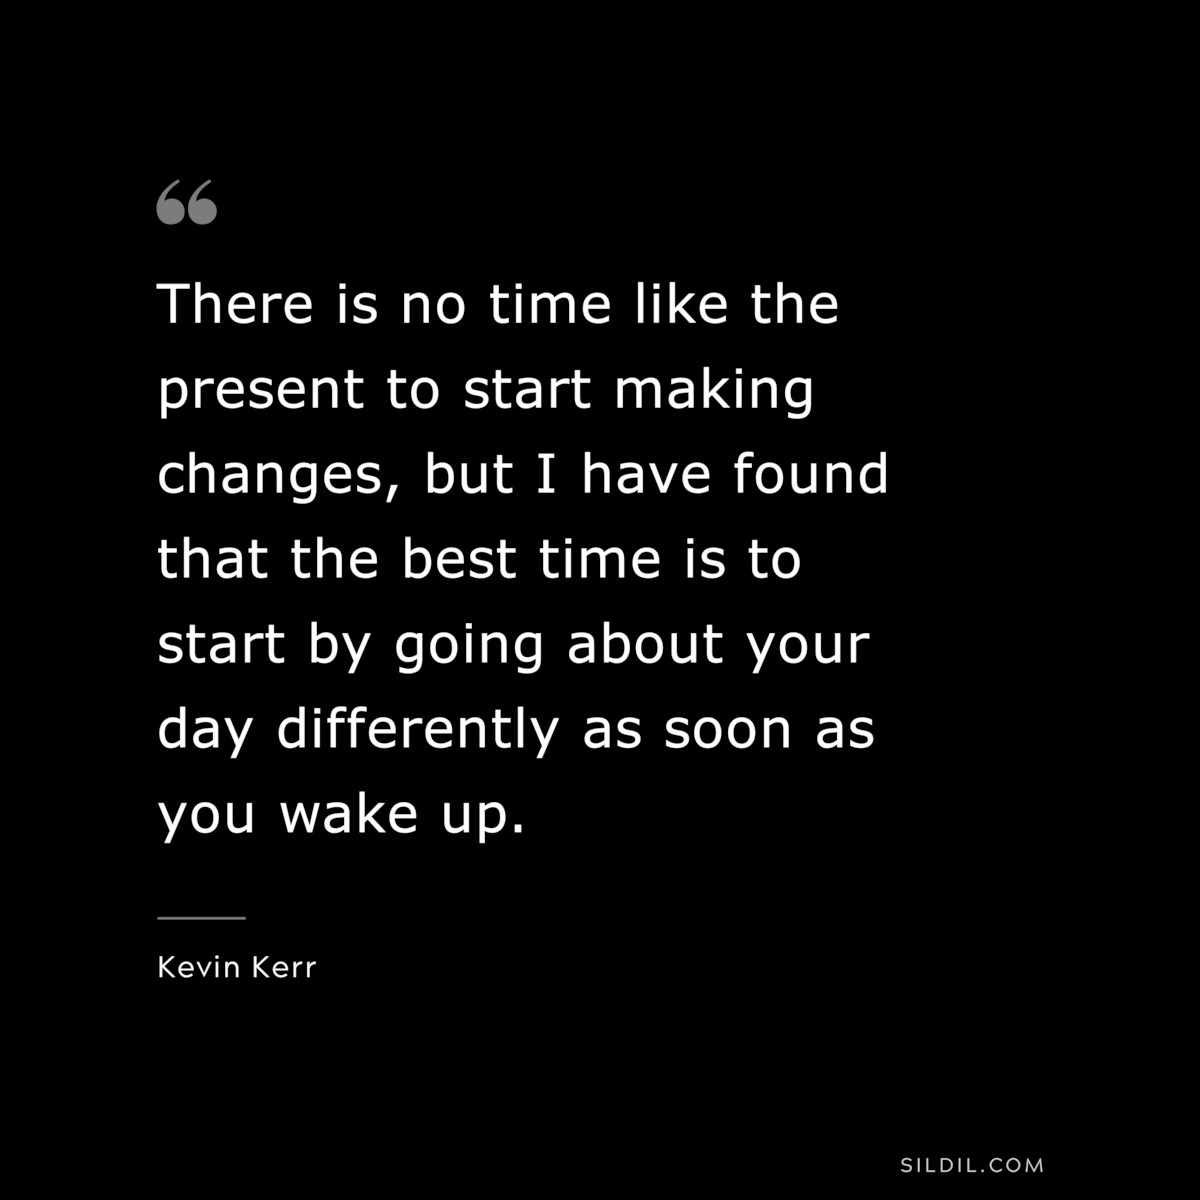 There is no time like the present to start making changes, but I have found that the best time is to start by going about your day differently as soon as you wake up. ― Kevin Kerr